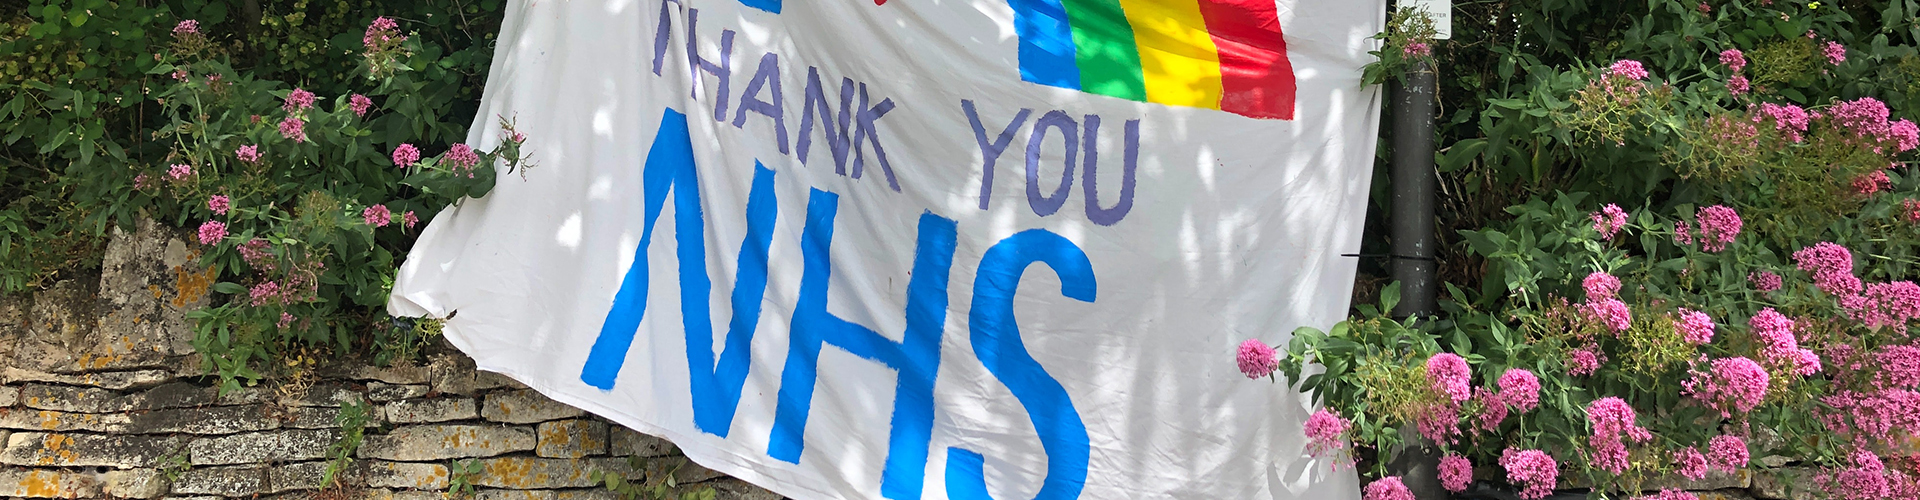 Thank you NHS Banner.